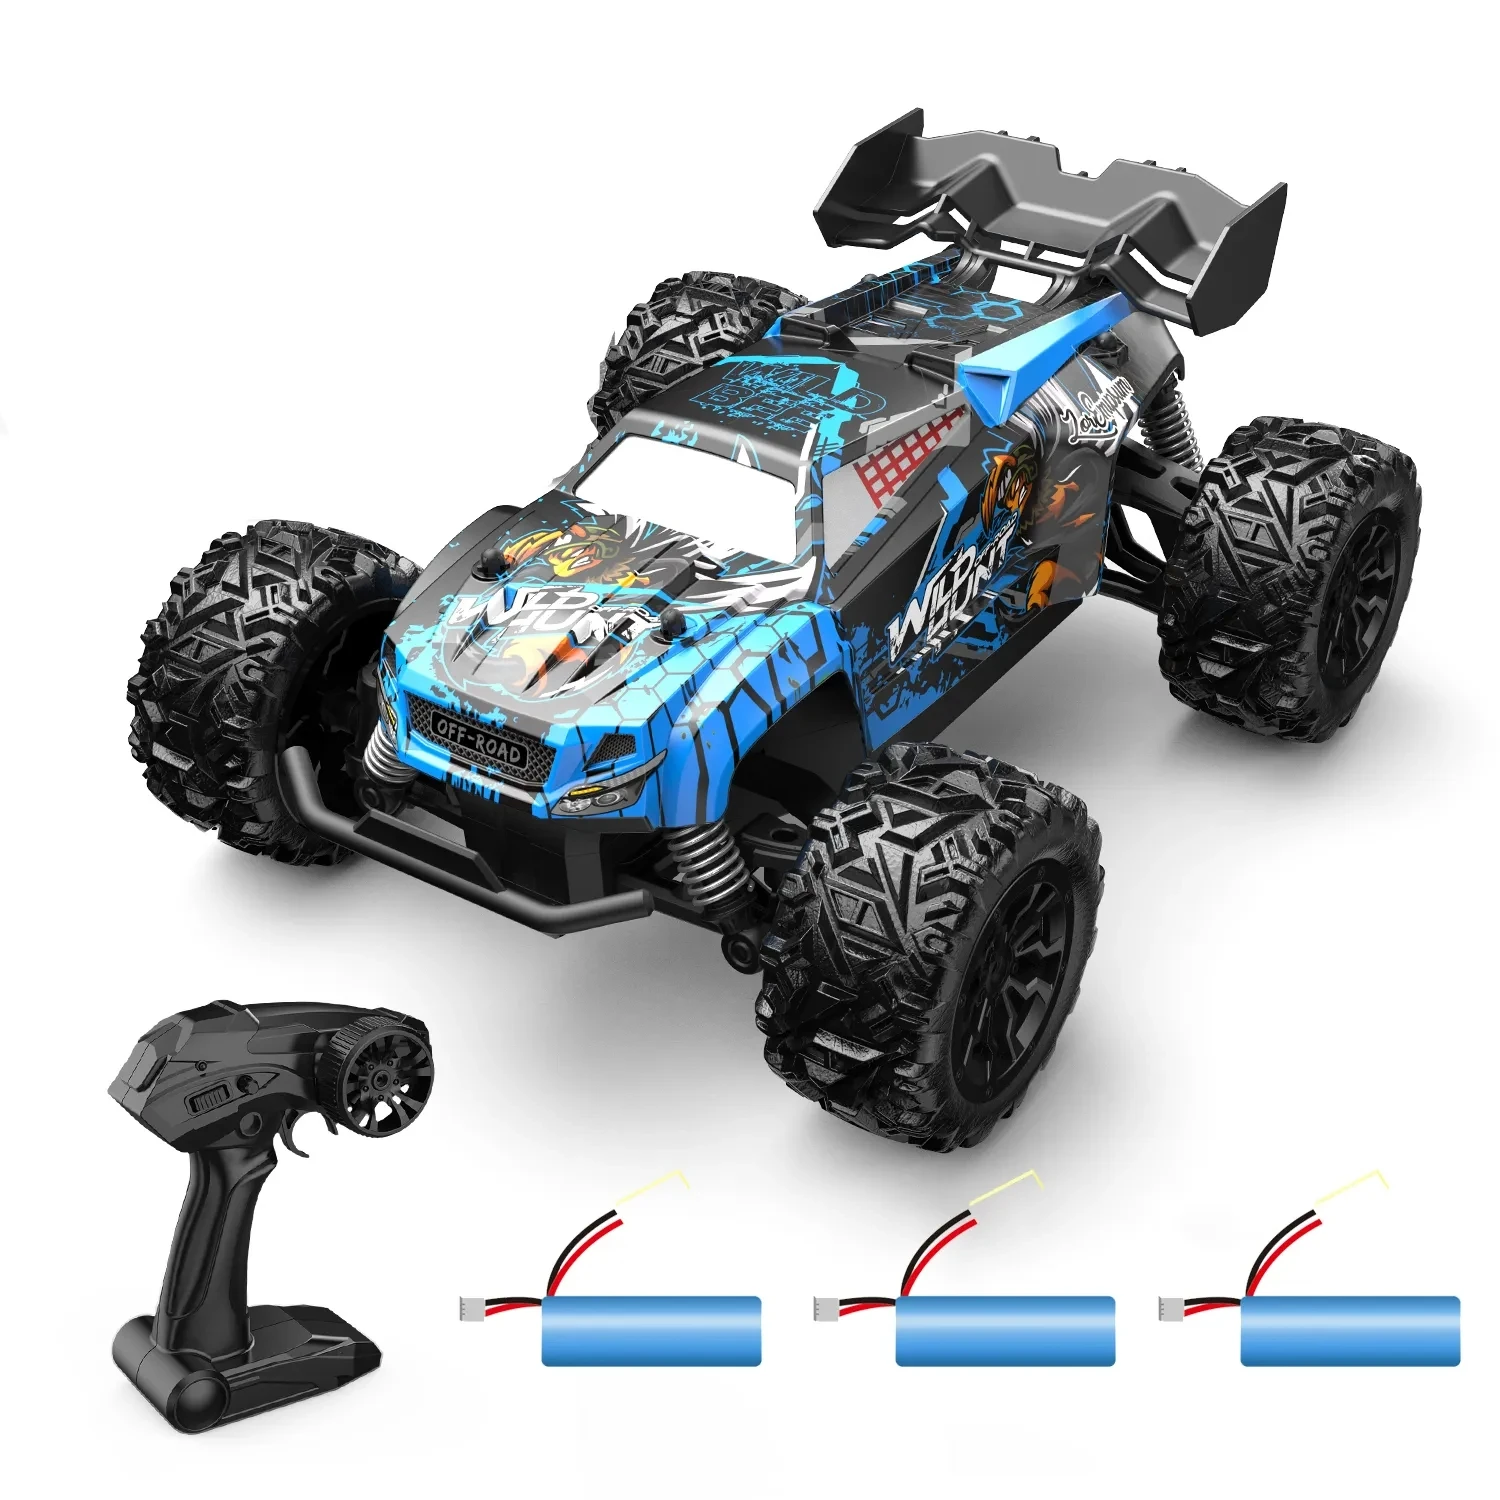 

20KM/H Power Motor 2.4G 2WD RC Drift Car Big Size RC Truck Independent Shock Absorber Anti-Crash Car Vehical Adults Kid Toy Gift